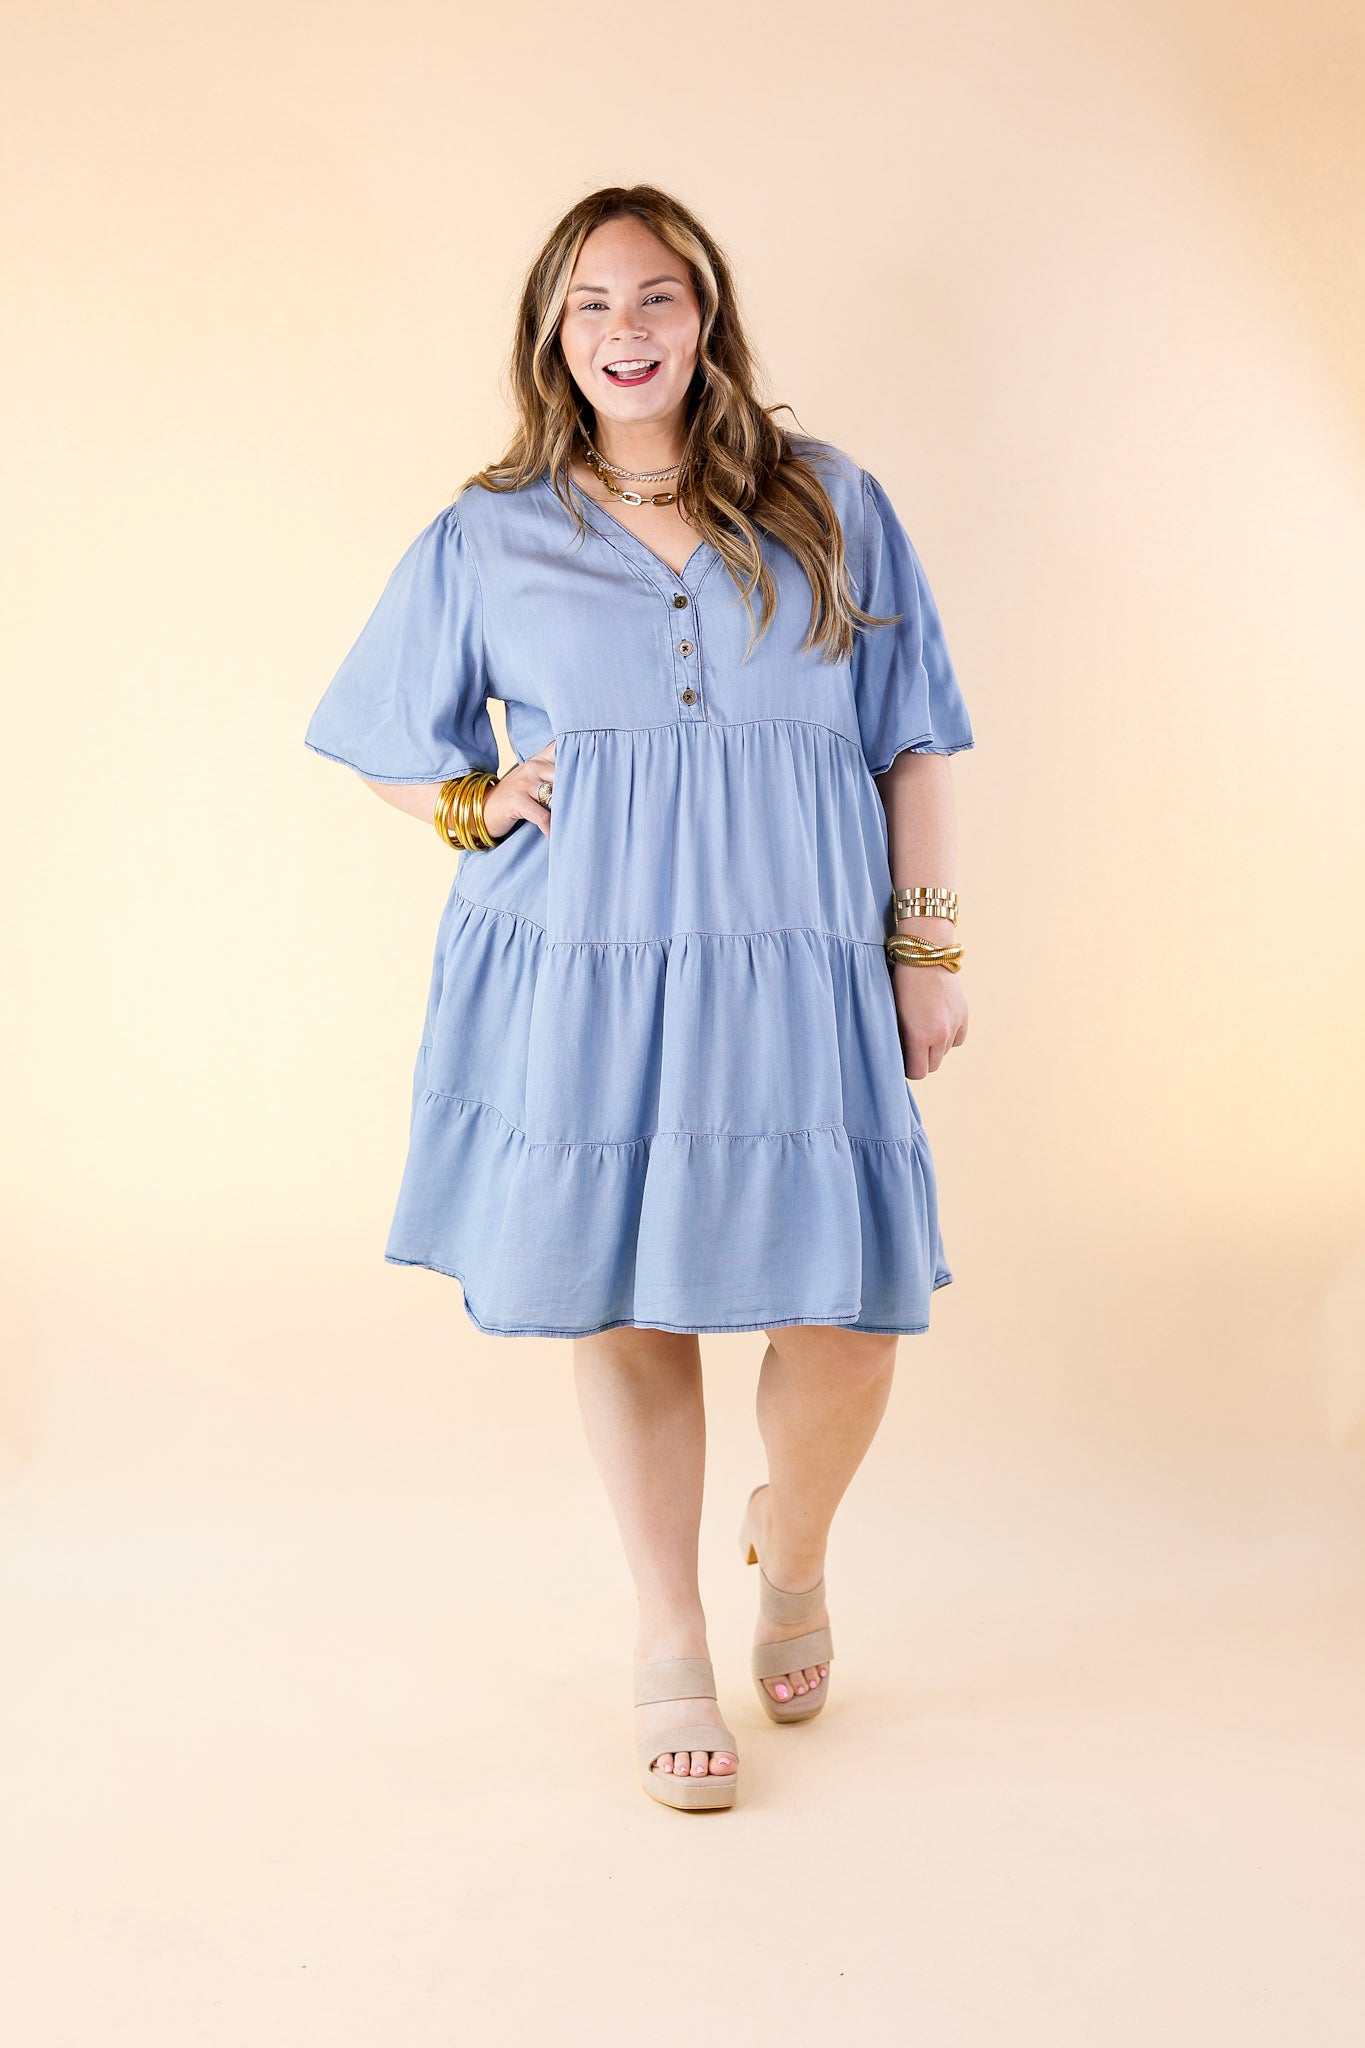 Truly Darling Chambray Tiered Dress with Button Up Yoke in Light Wash - Giddy Up Glamour Boutique